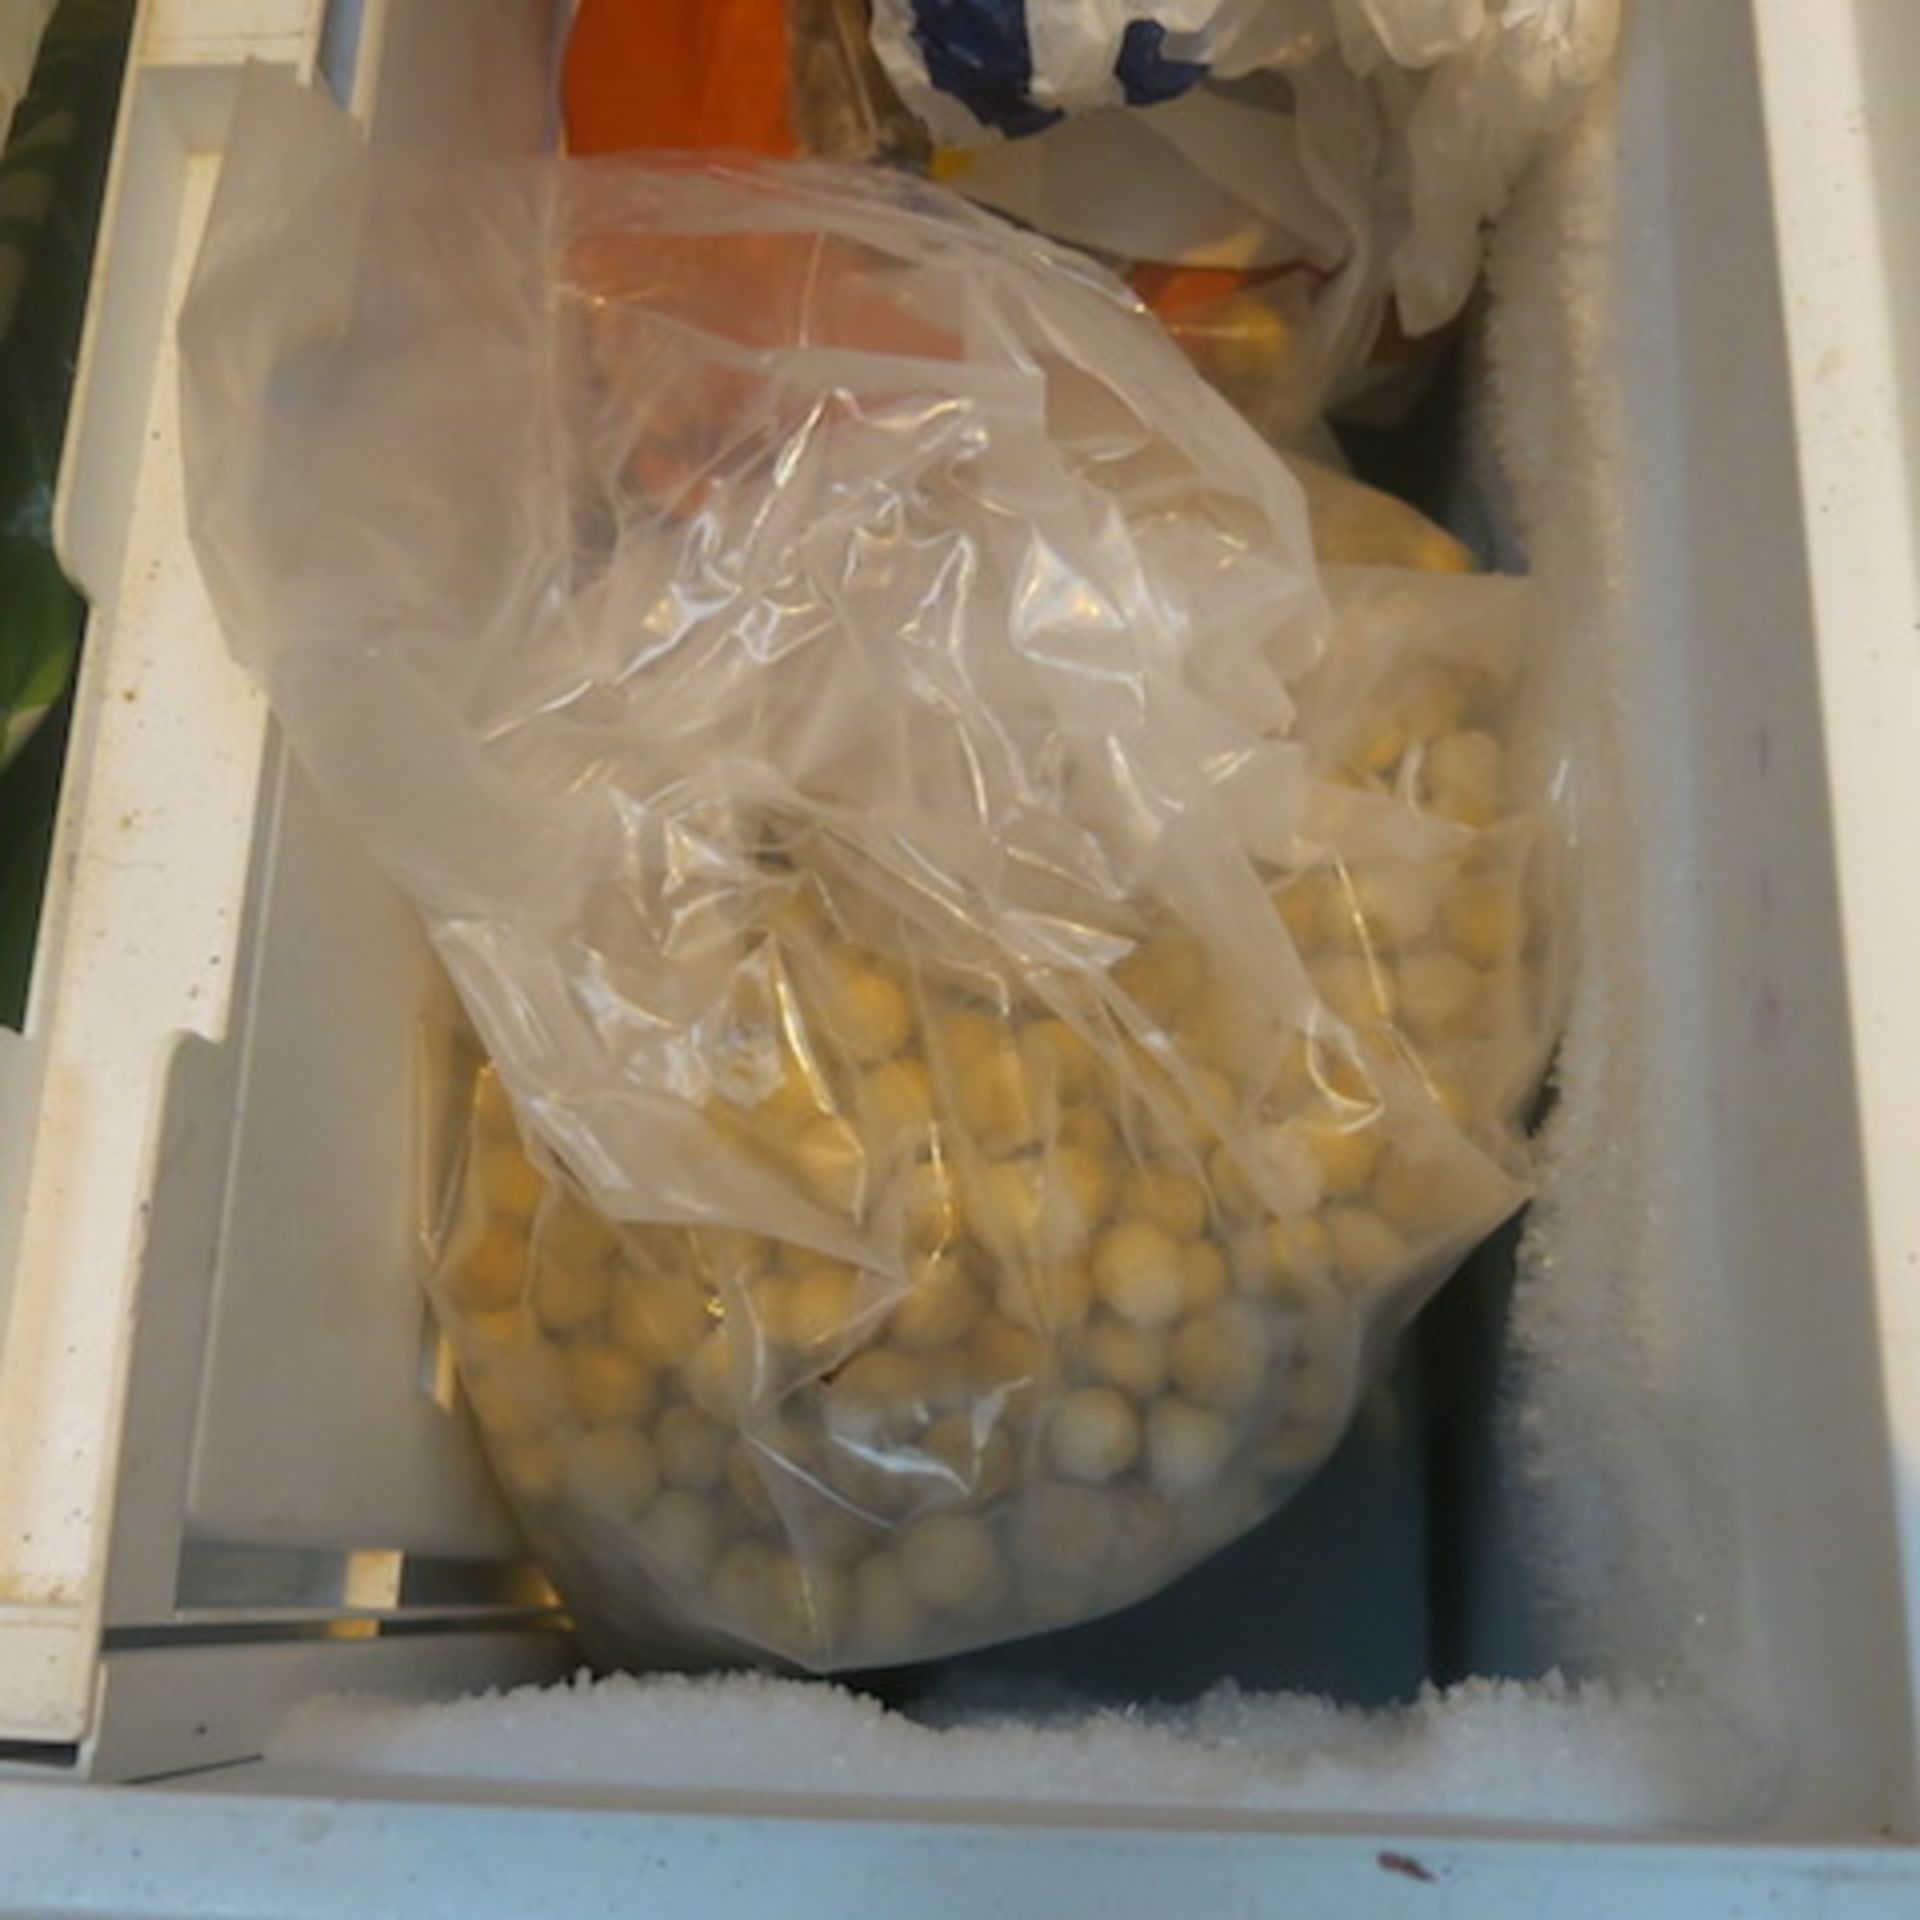 1 x Scandinavia Chest Freezers with a Qty of Frozen Predator Sea Fish Bait, (As Viewed/Pictured. - Image 10 of 13